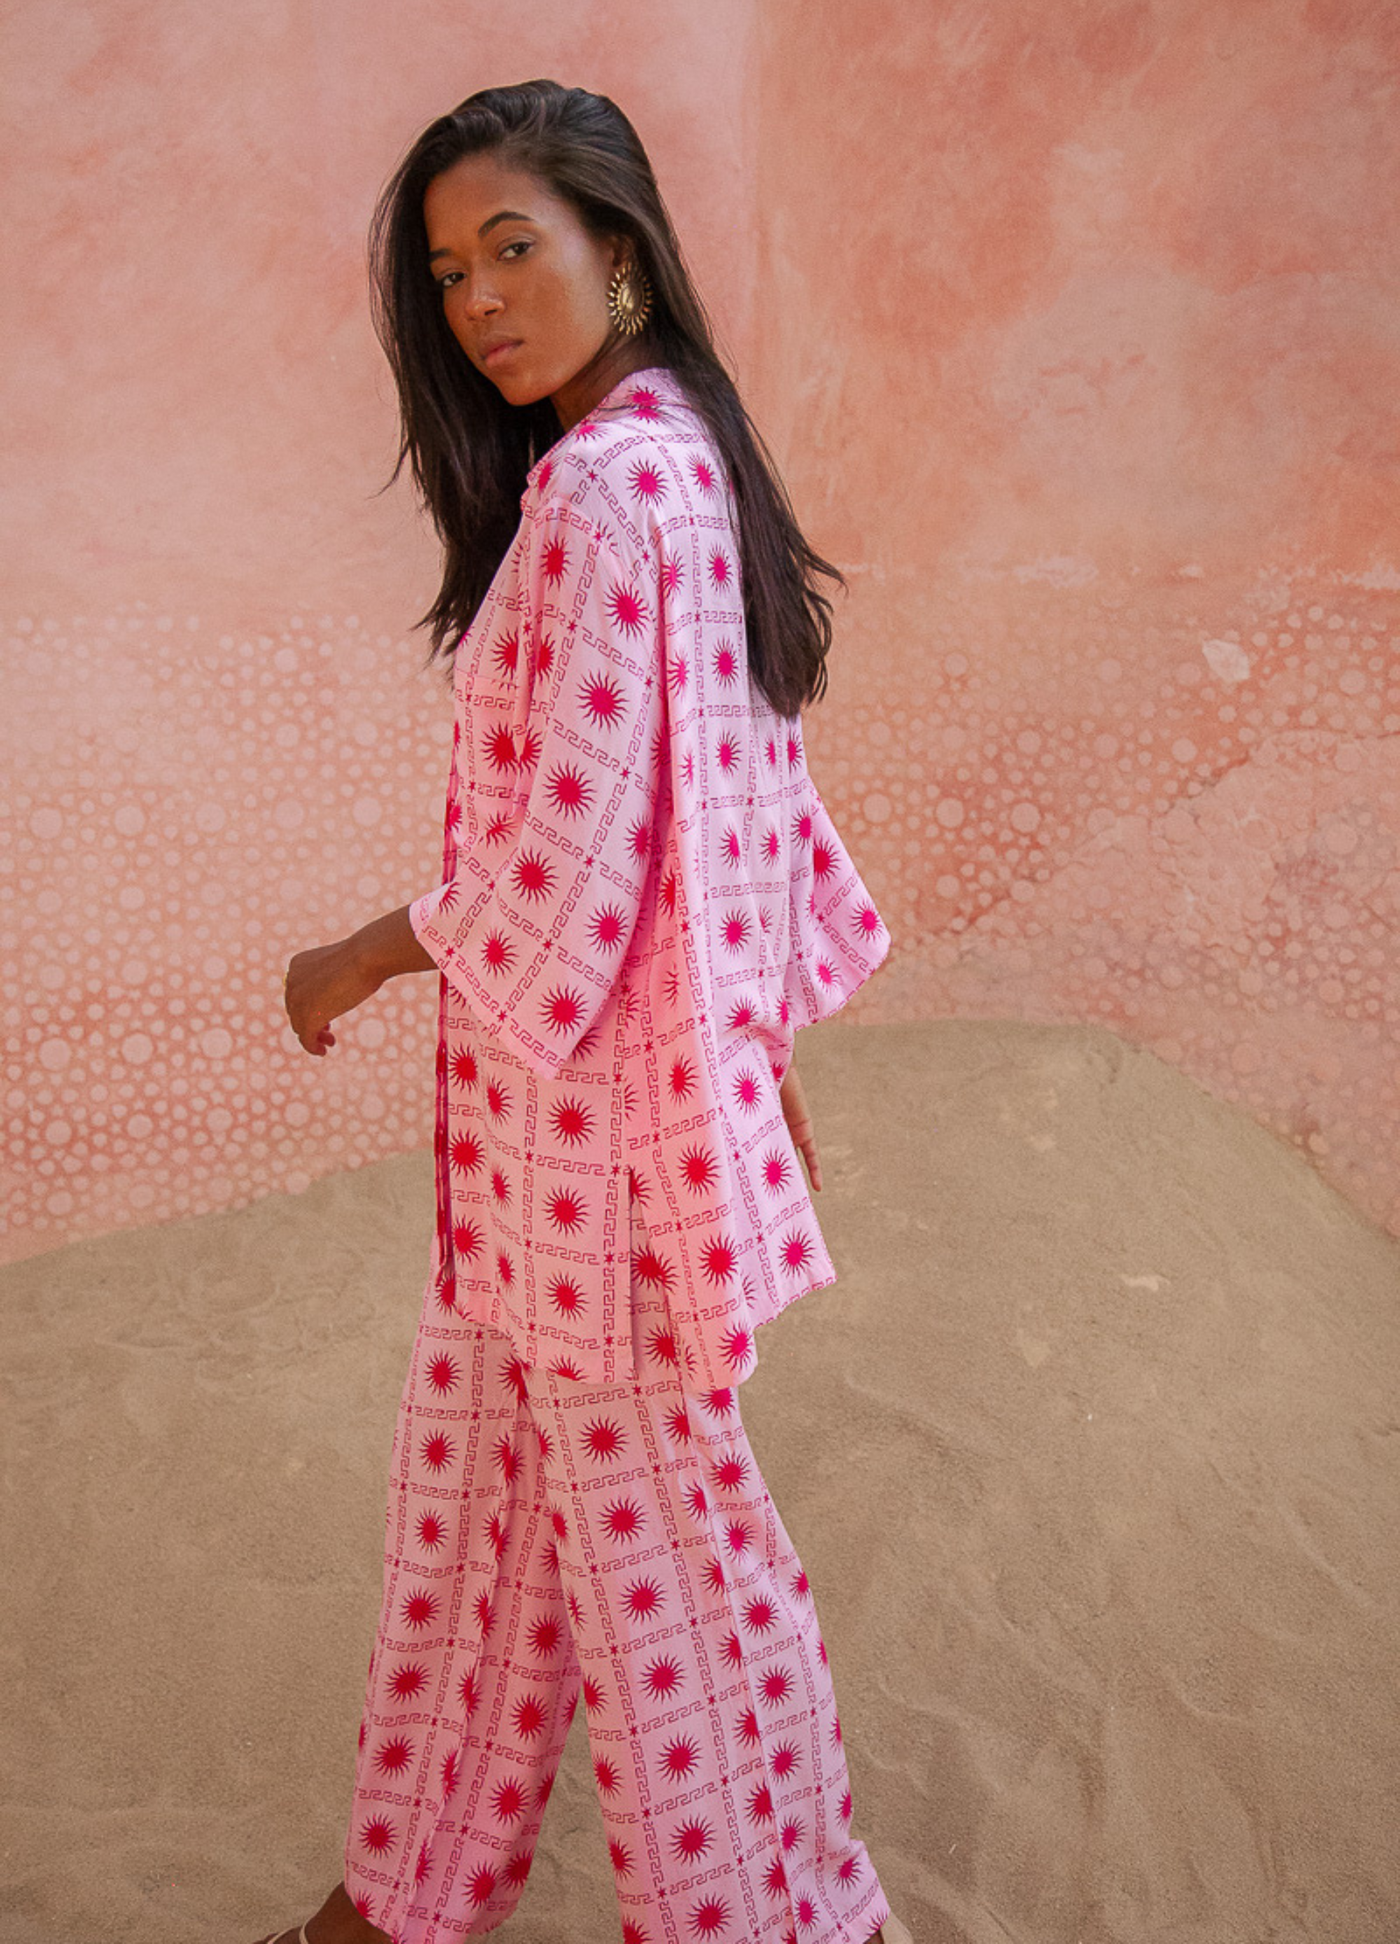 Model wearing the spanish sun pants in pink and red